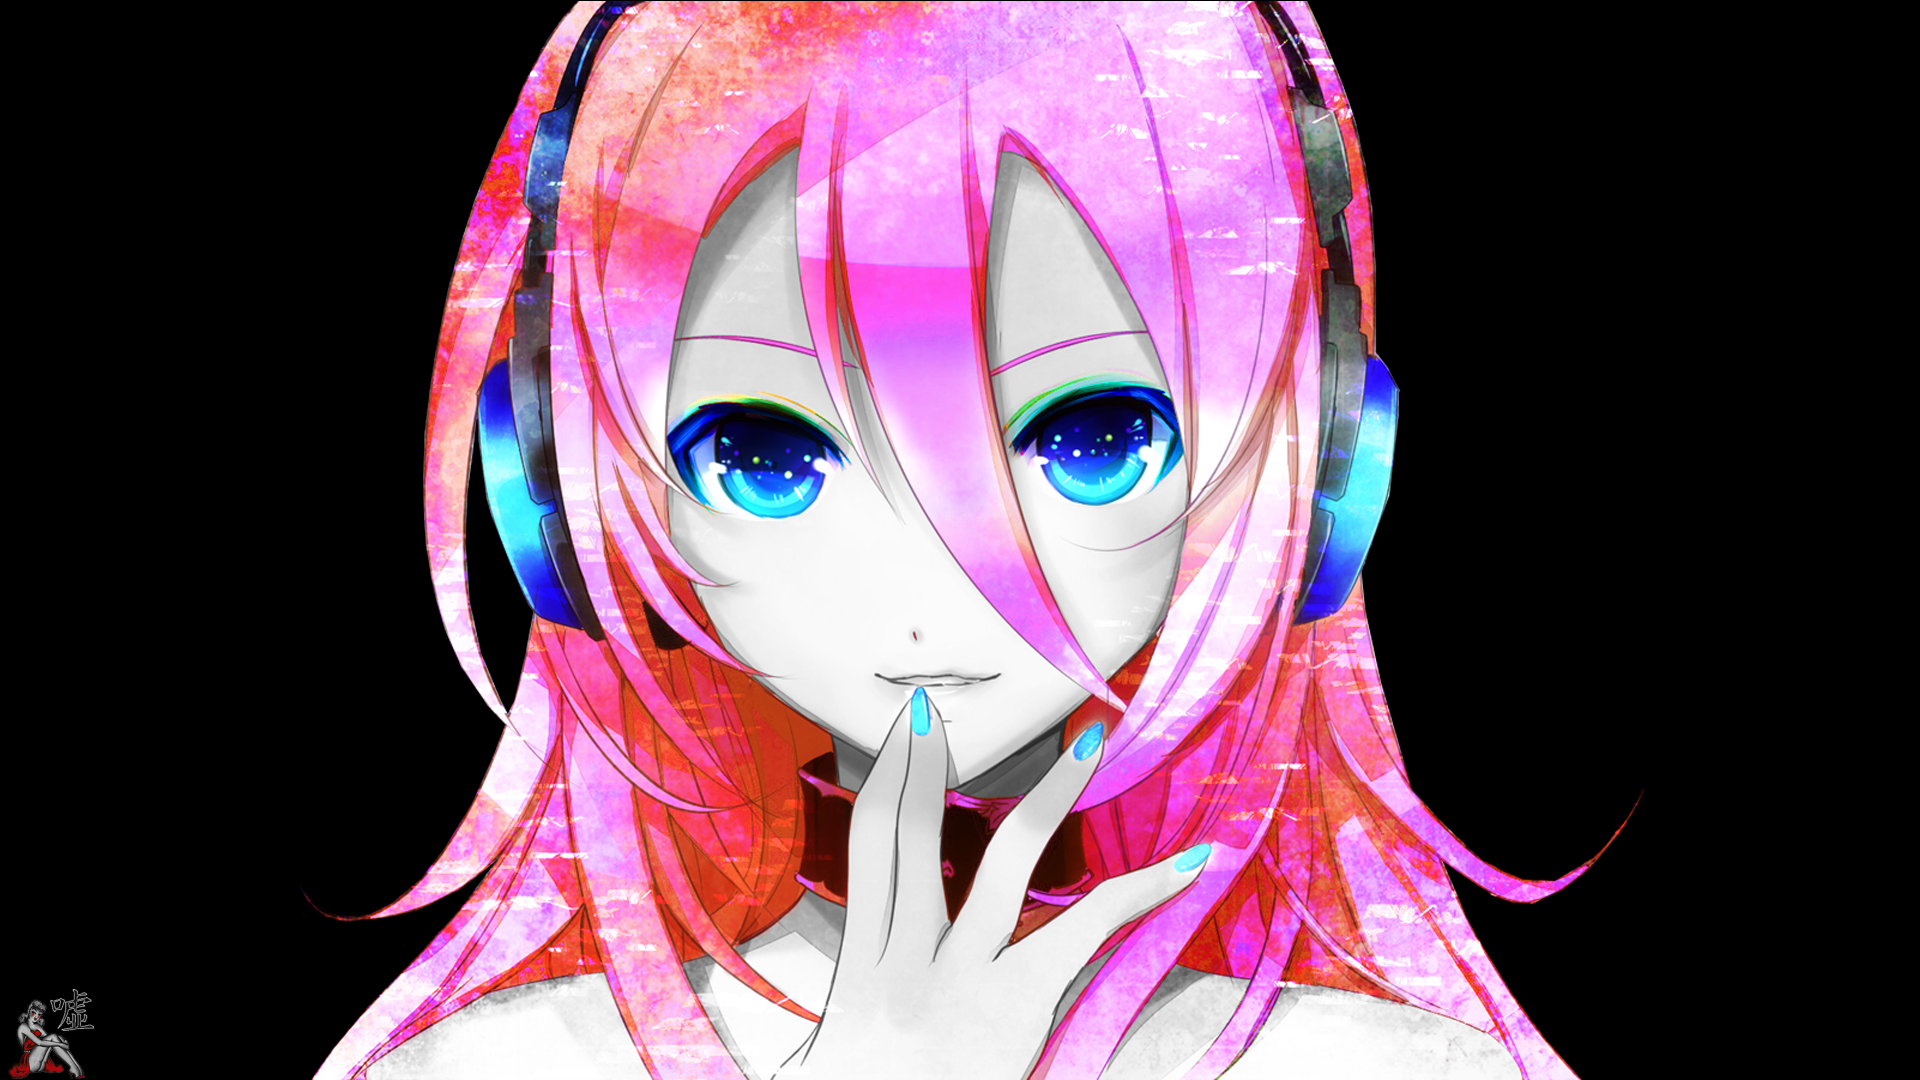 Anime Vocaloid Lily Vocaloid Anime Girls Blue Eyes Headphones Painted Nails 1920x1080